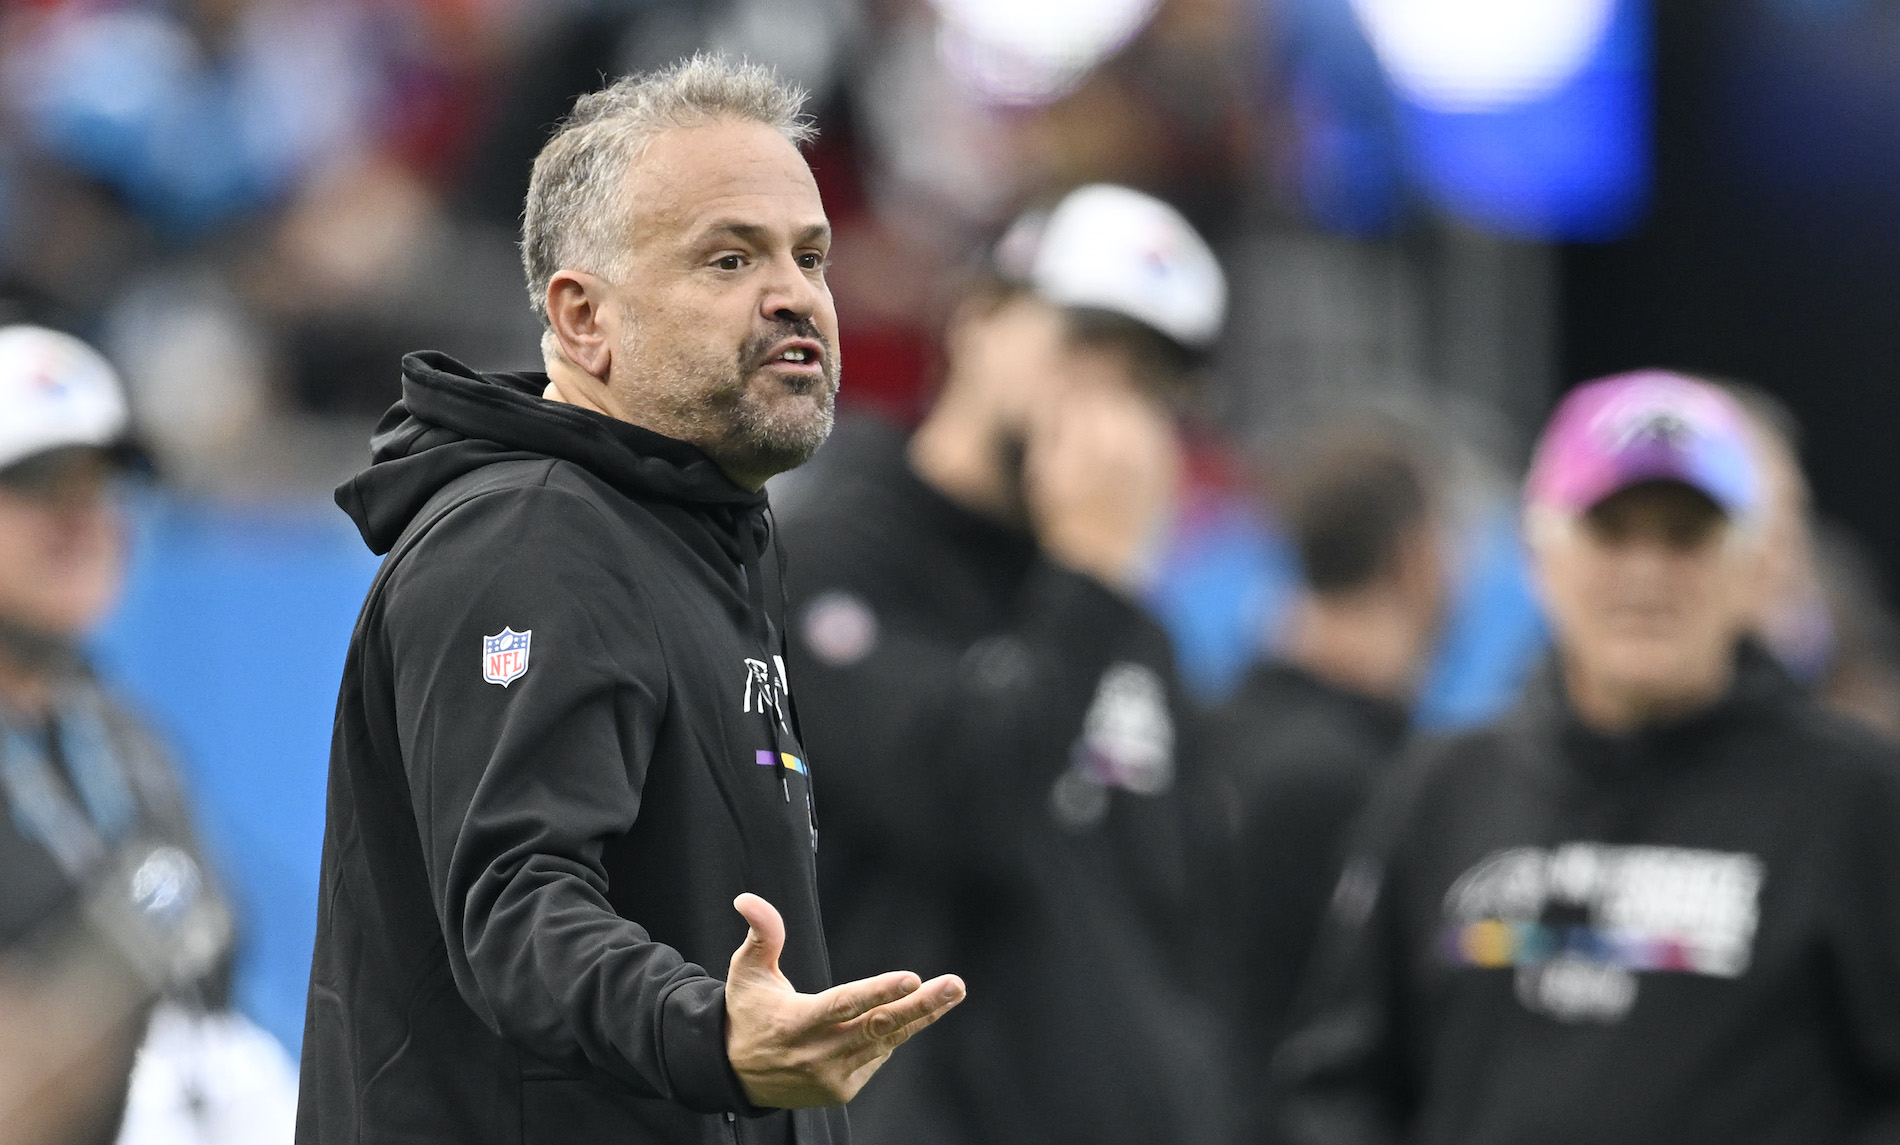 Head coach Matt Rhule of the Carolina Panthers talks with officials during the second quarter of the game against the San Francisco 49ers at Bank of America Stadium on October 09, 2022 in Charlotte, North Carolina.